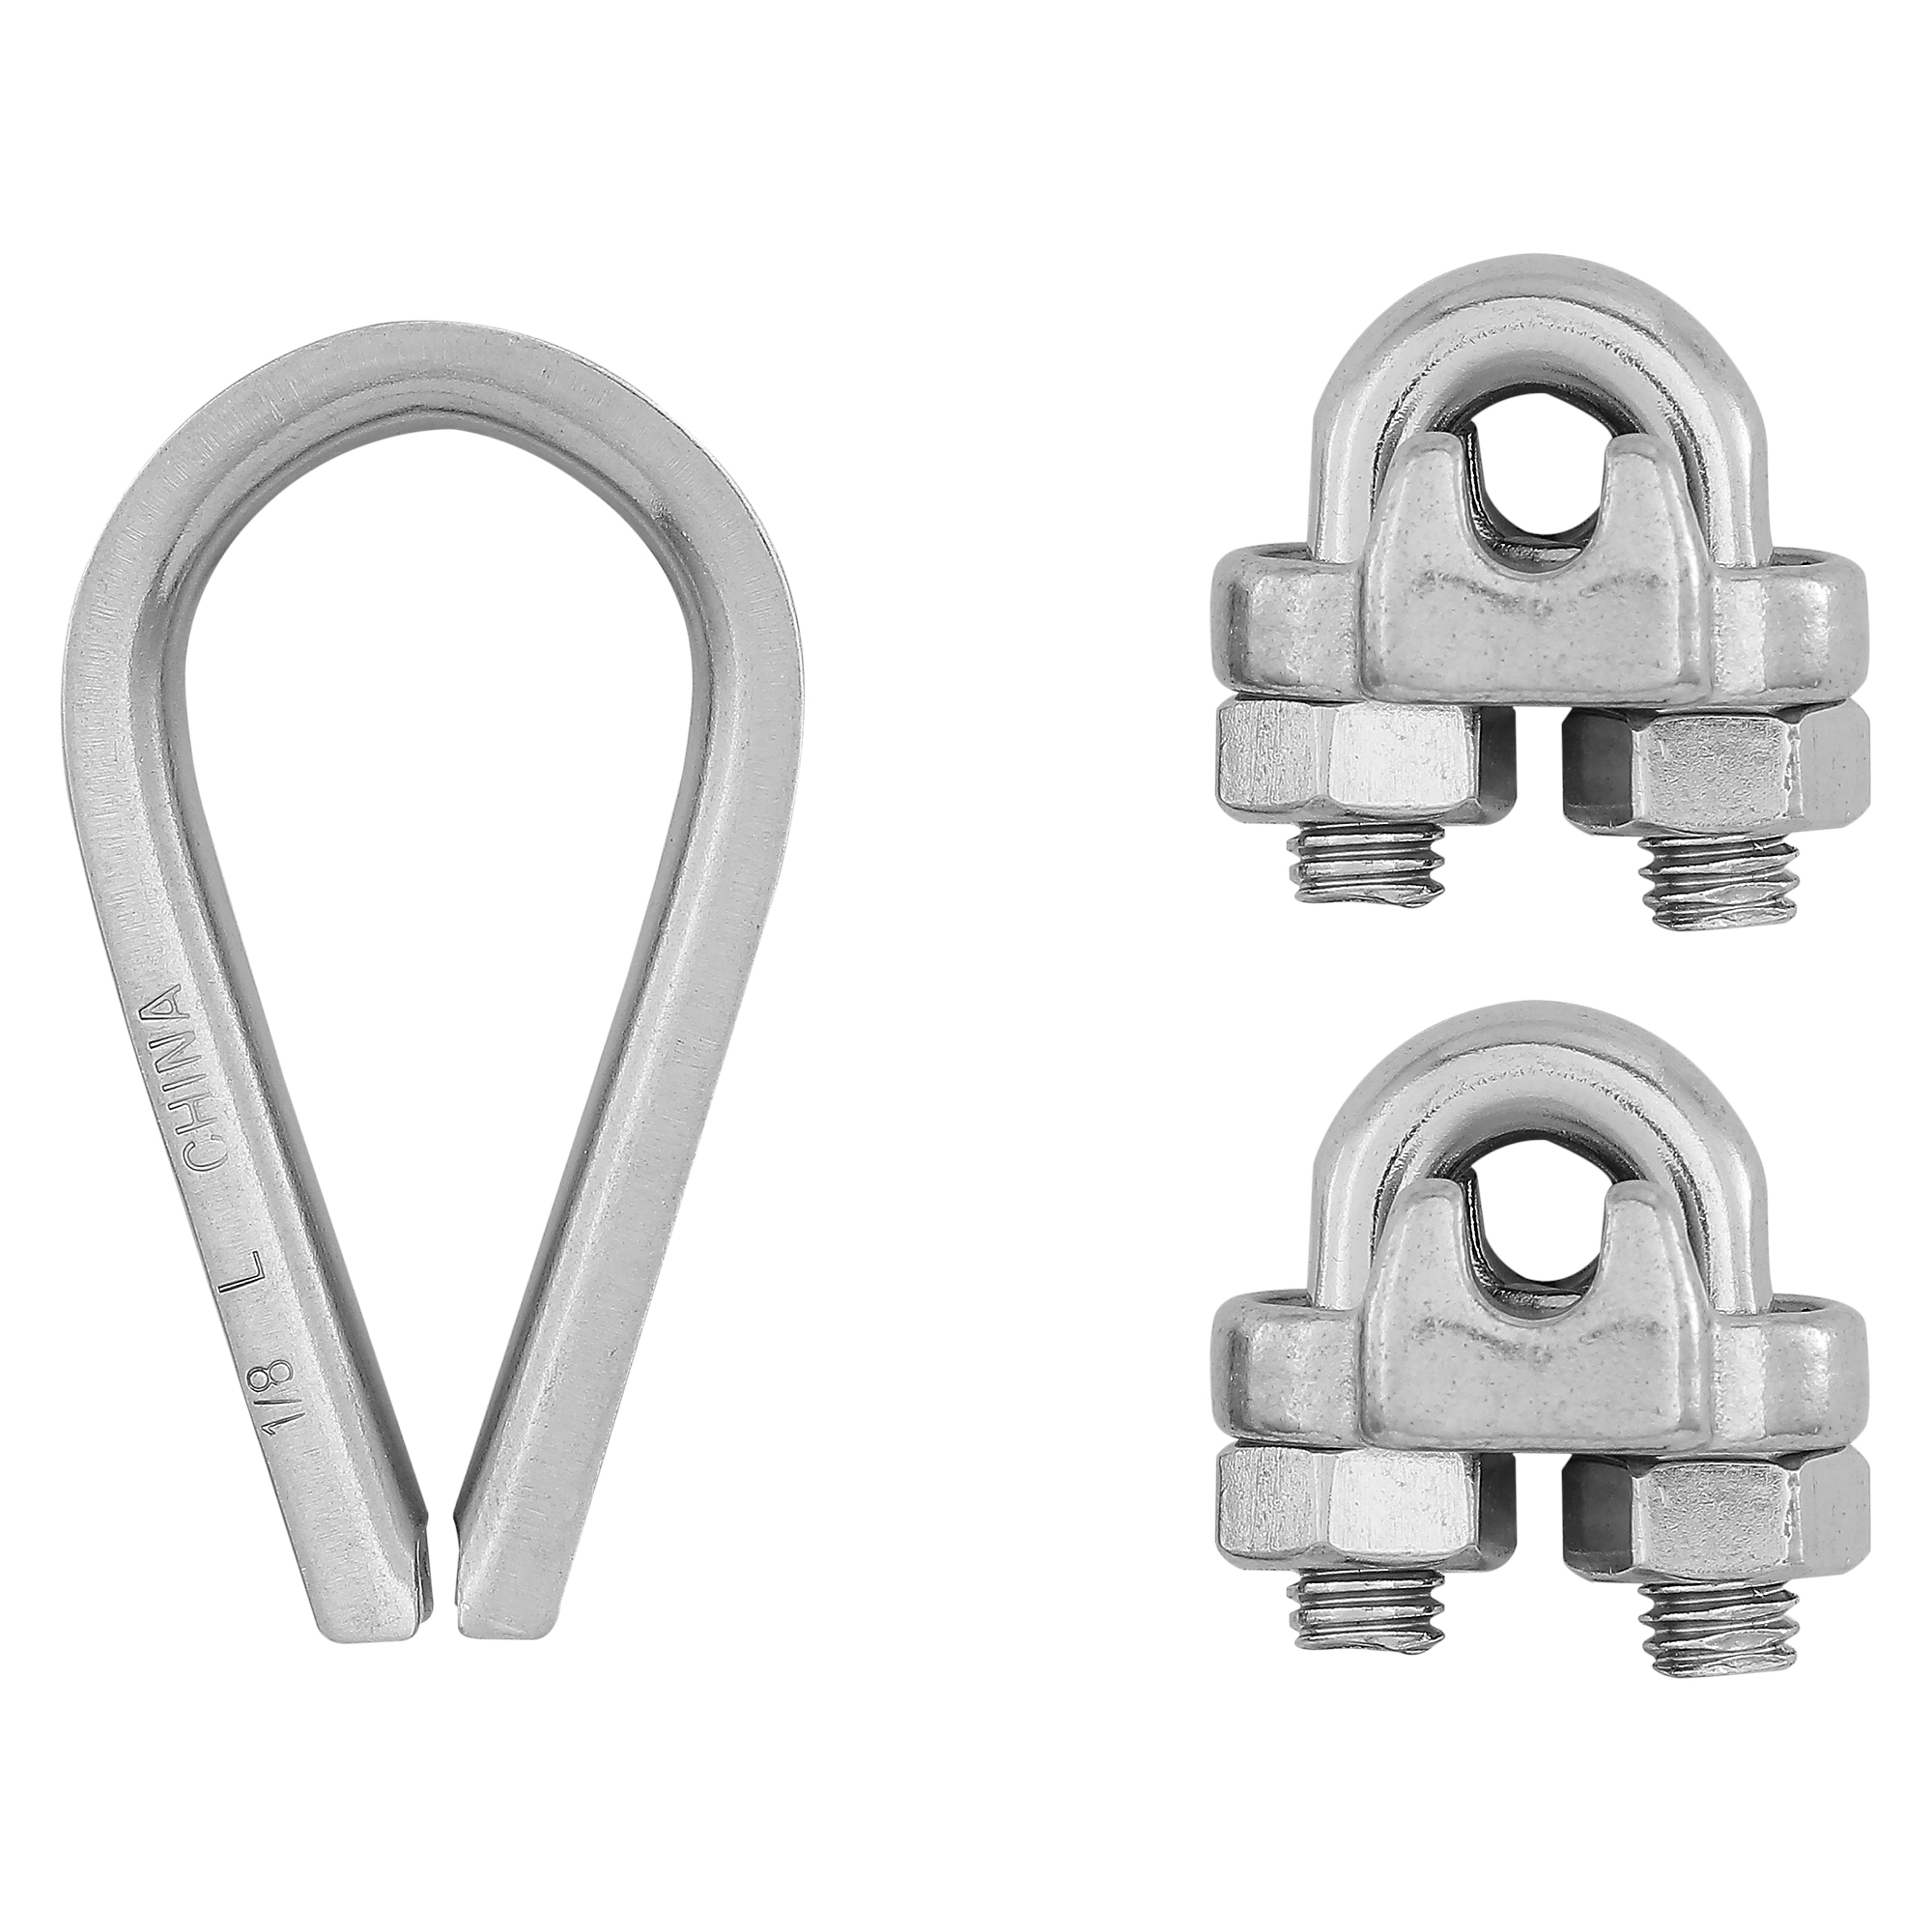 N100-349 Cable Clamp Kit, 1/8 in Dia Cable, Stainless Steel